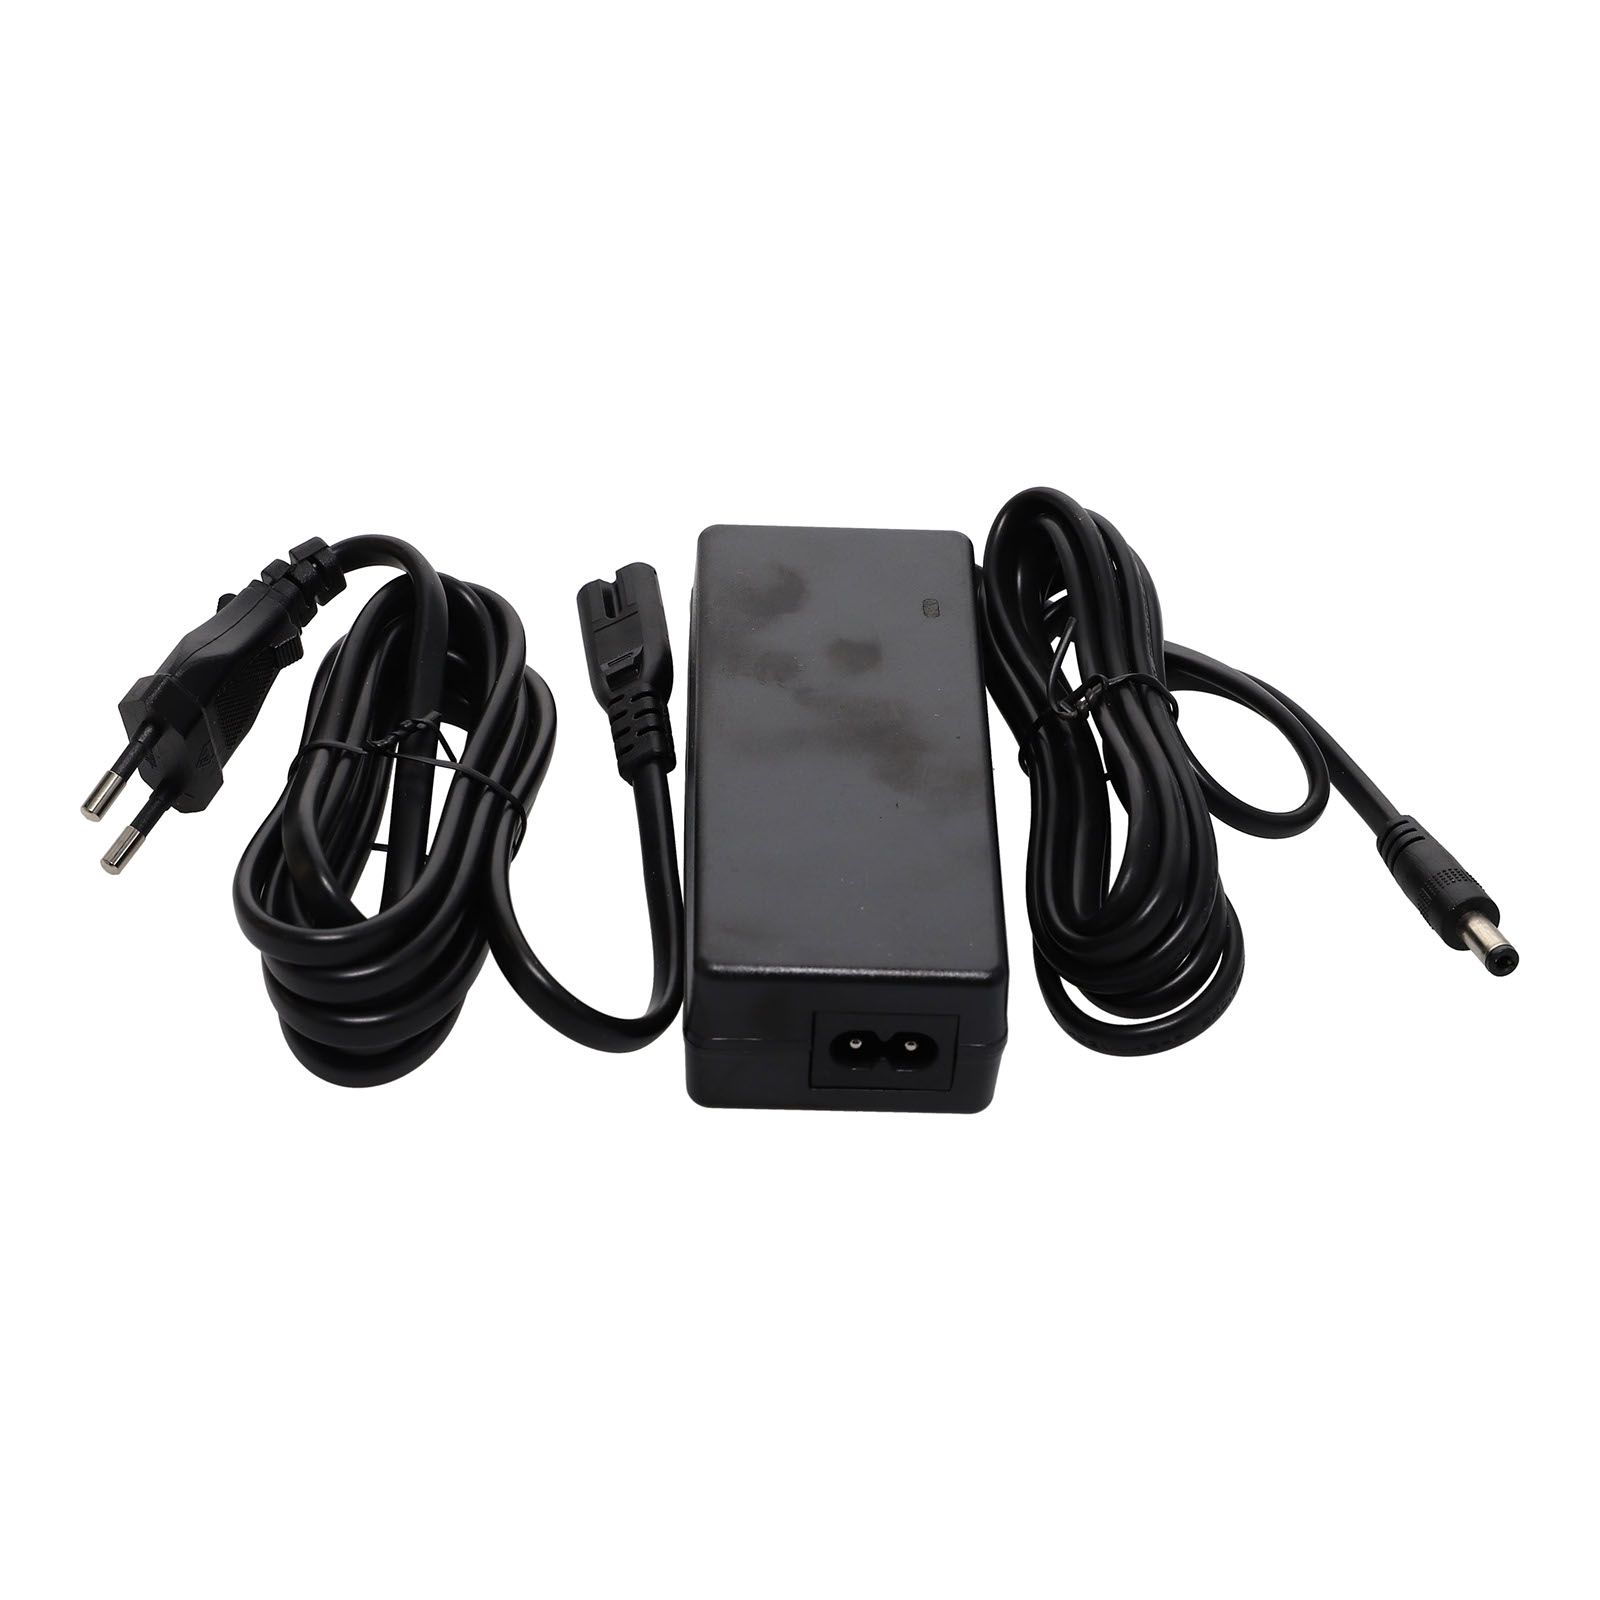 CHARGER FOR ULTRACAPACITOR JUMP STARTERS product photo